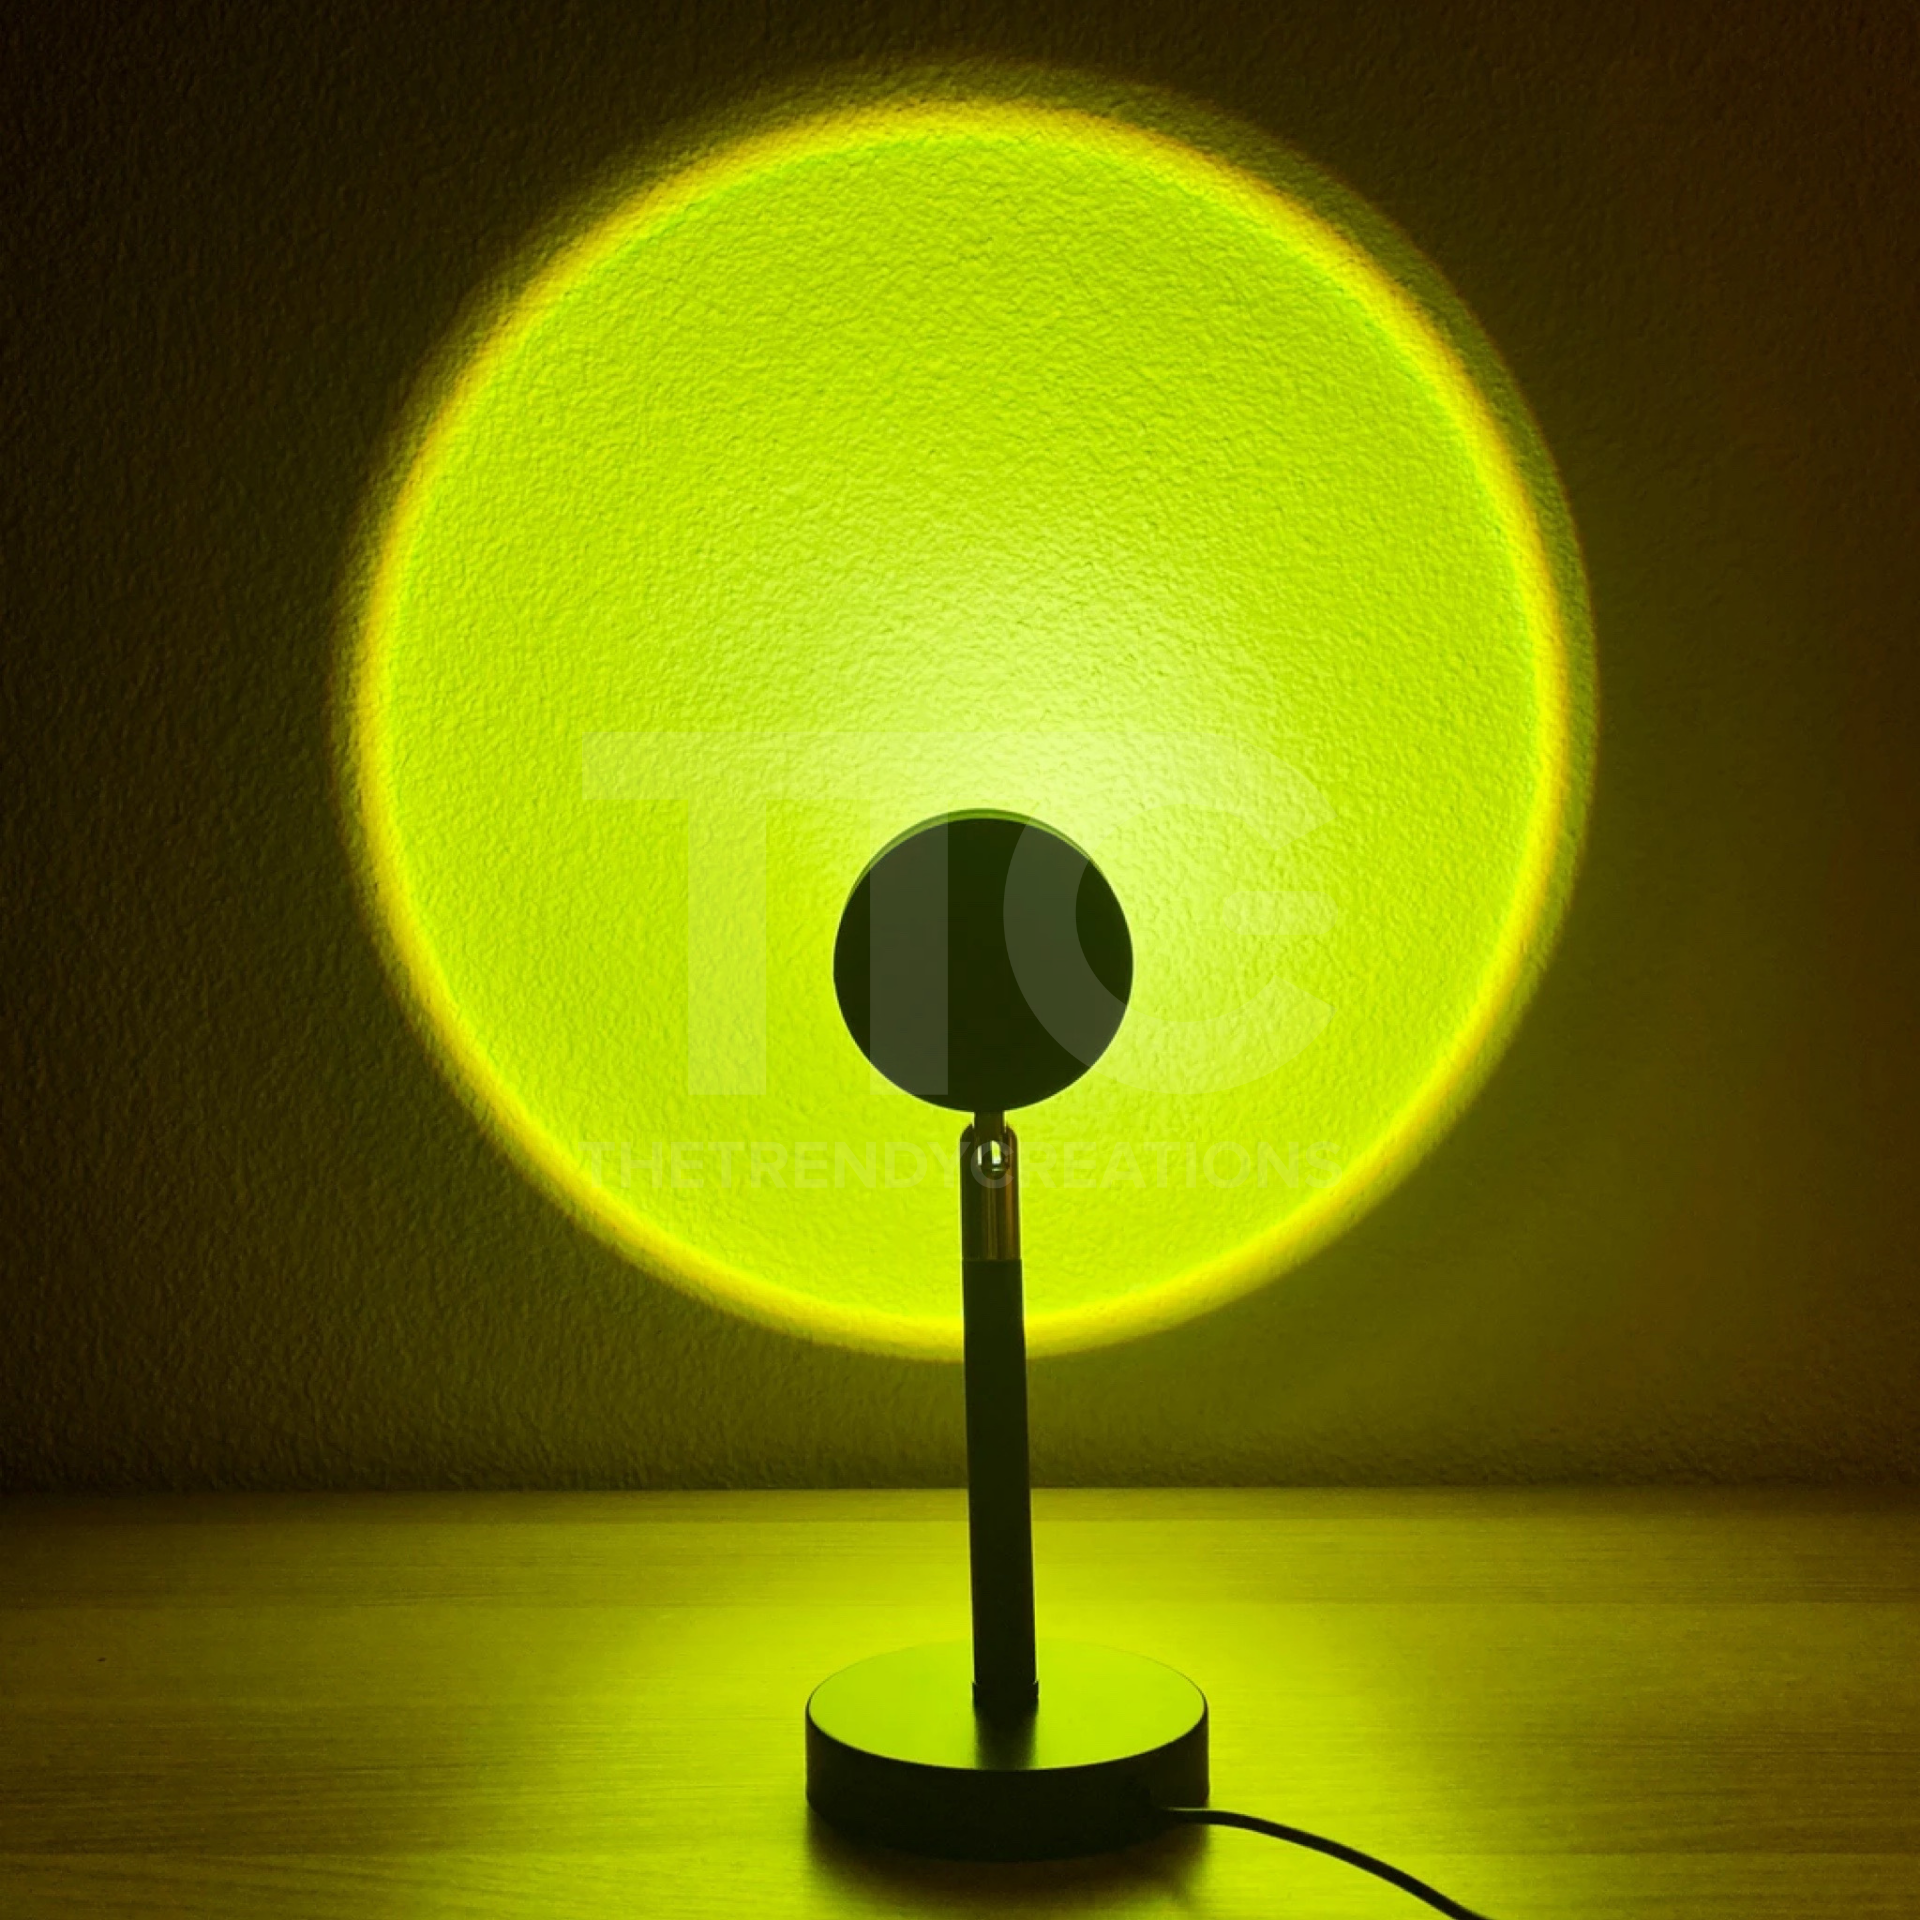 Sunset Projector Lamp Remote Version By The Trendy Creations – The